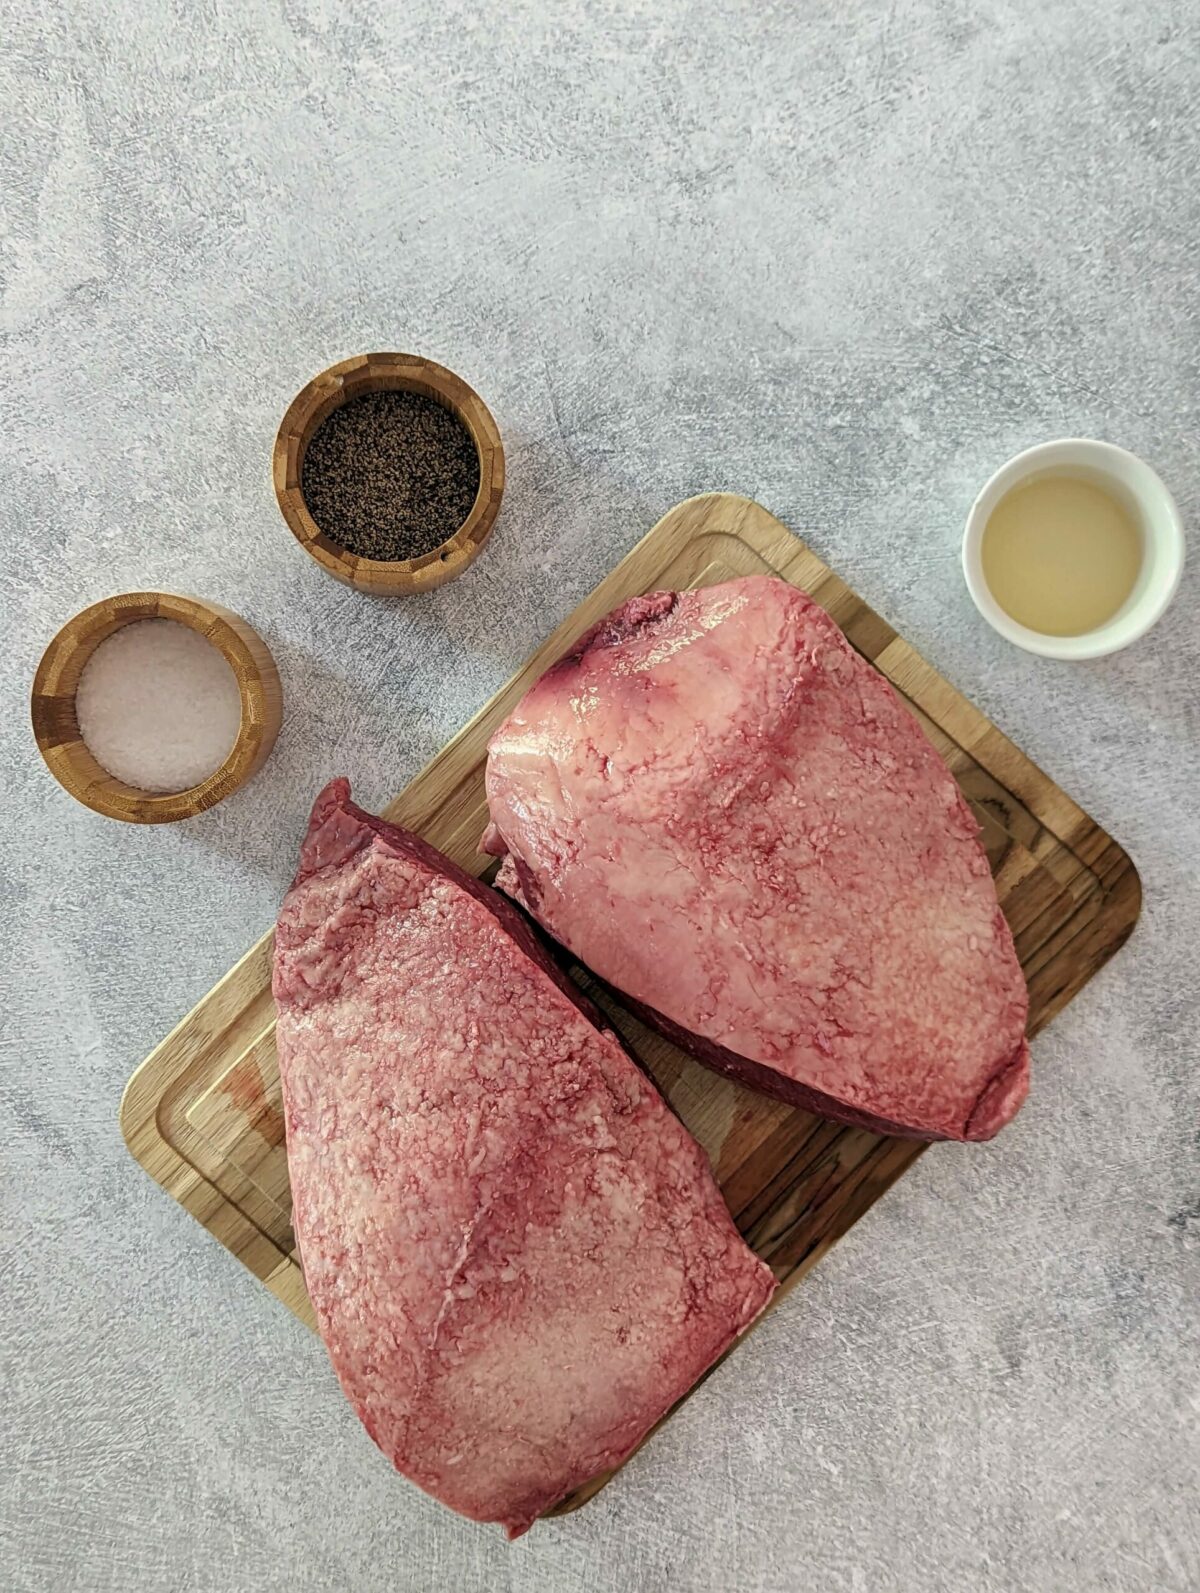 A image showing the ingredients for grilled picanha.